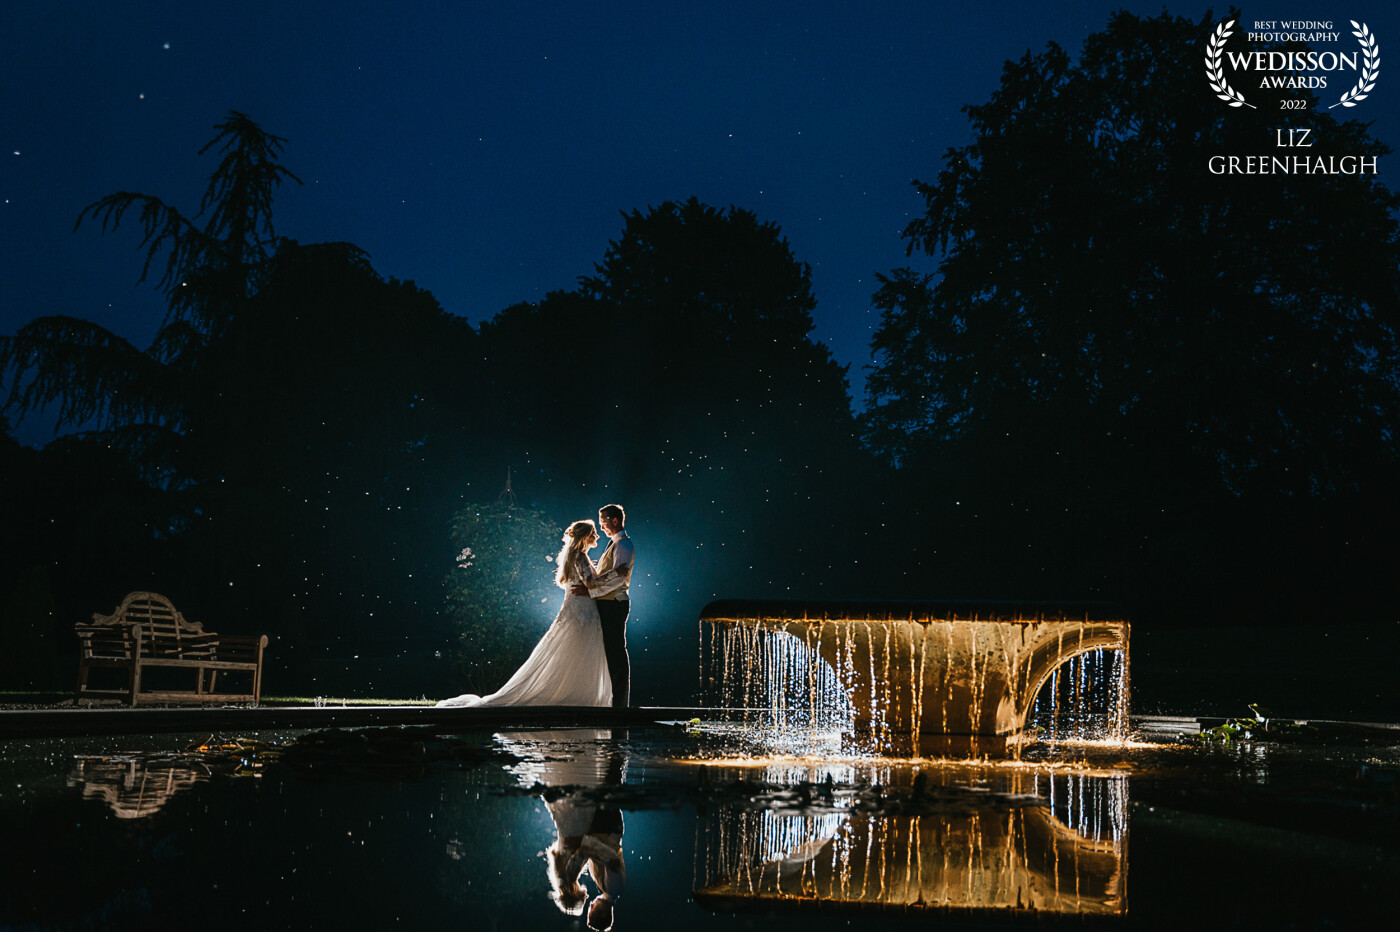 The final shot of the night was taken in front of the main house, turning around I saw that the fountain was lit up and know the shot that I wanted to take at Exton Hall